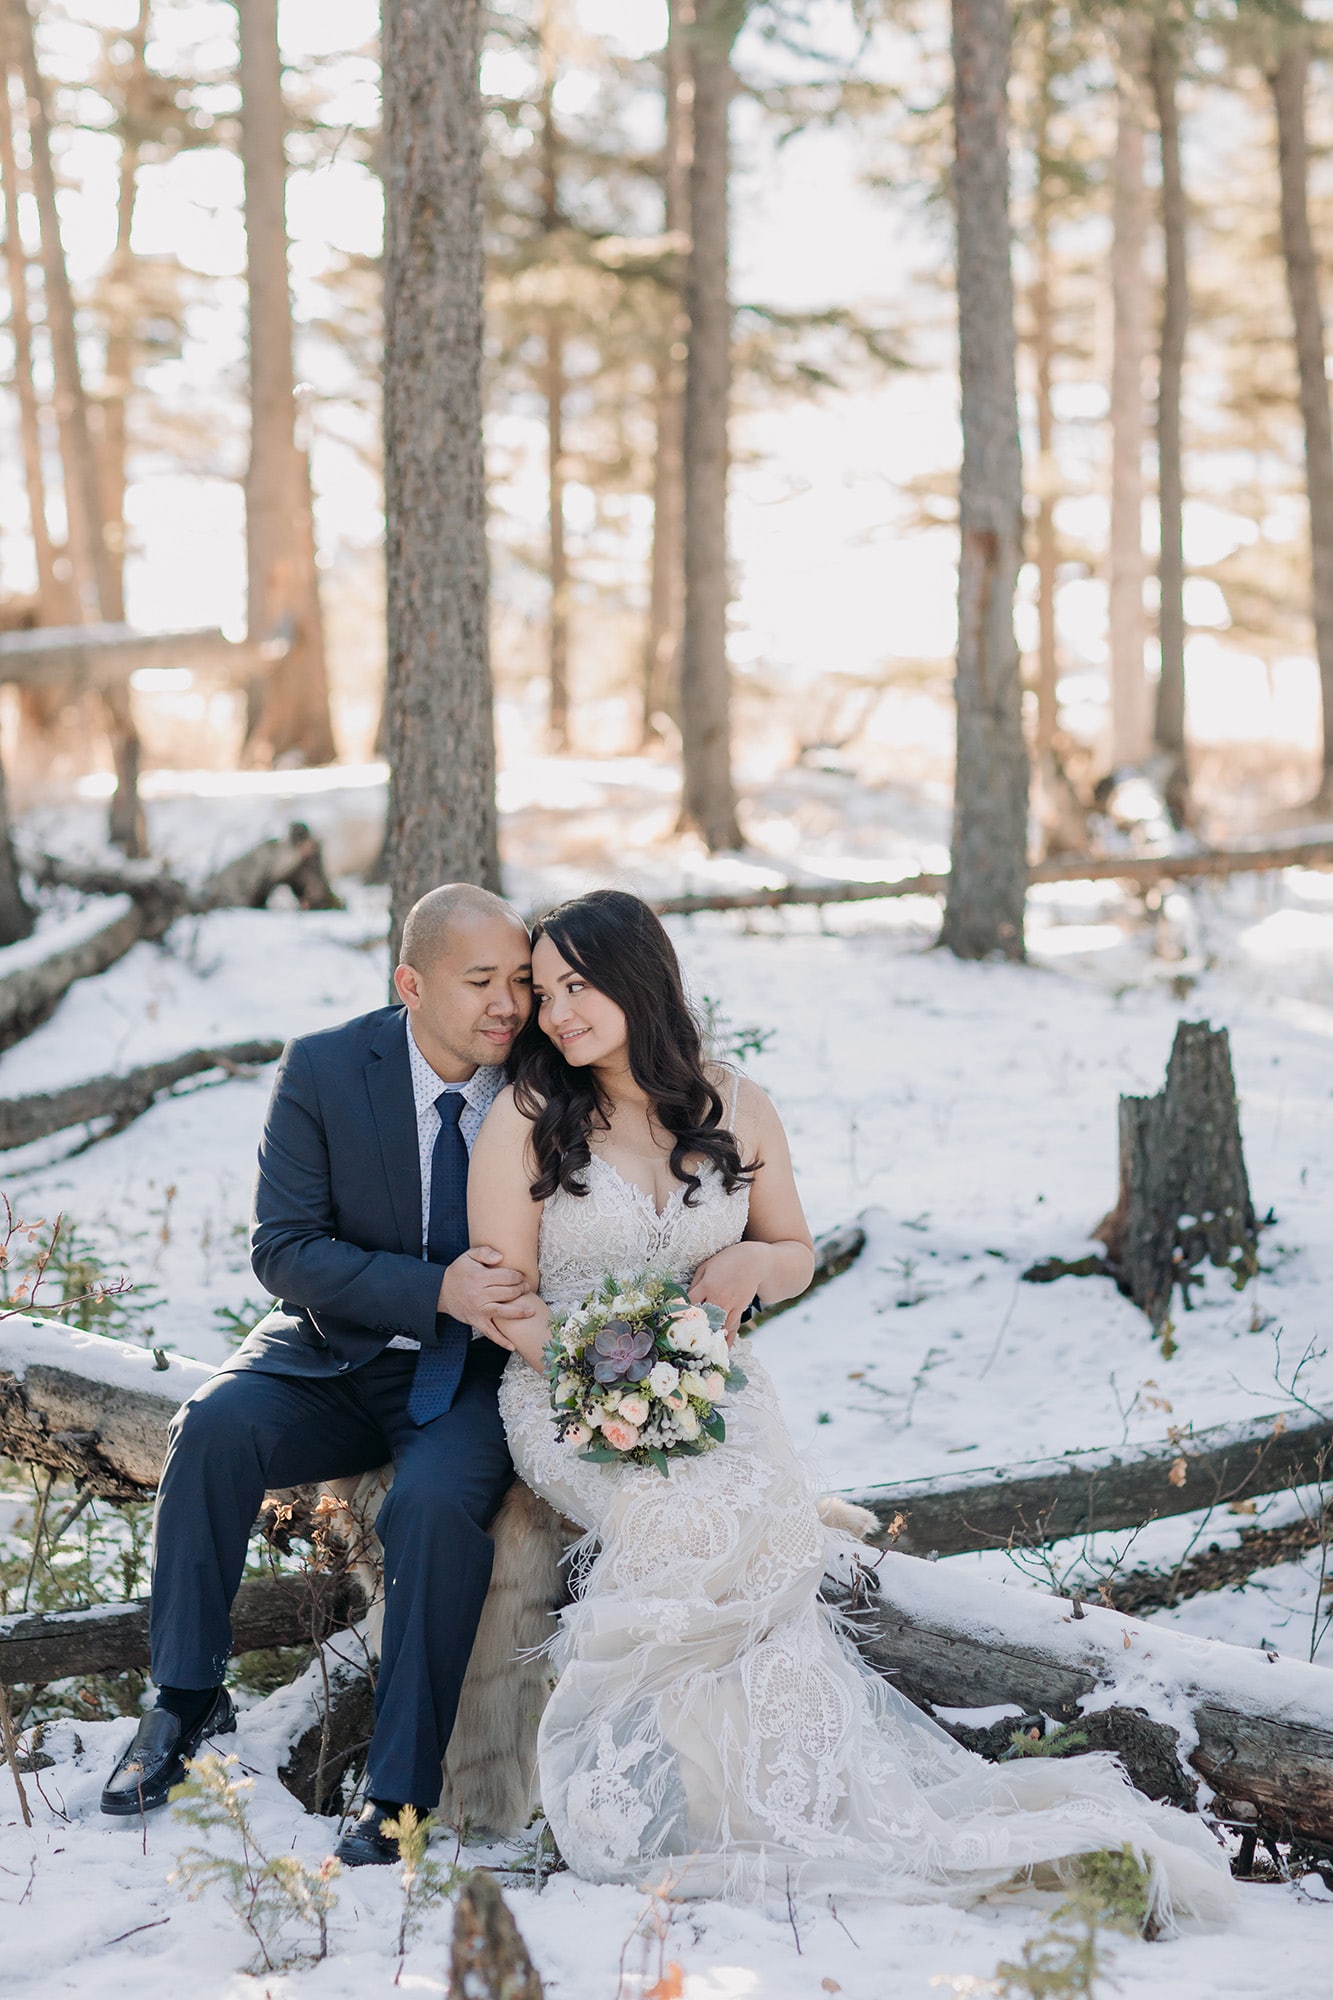 intimate wedding portraits in the forest snowy woodland photos